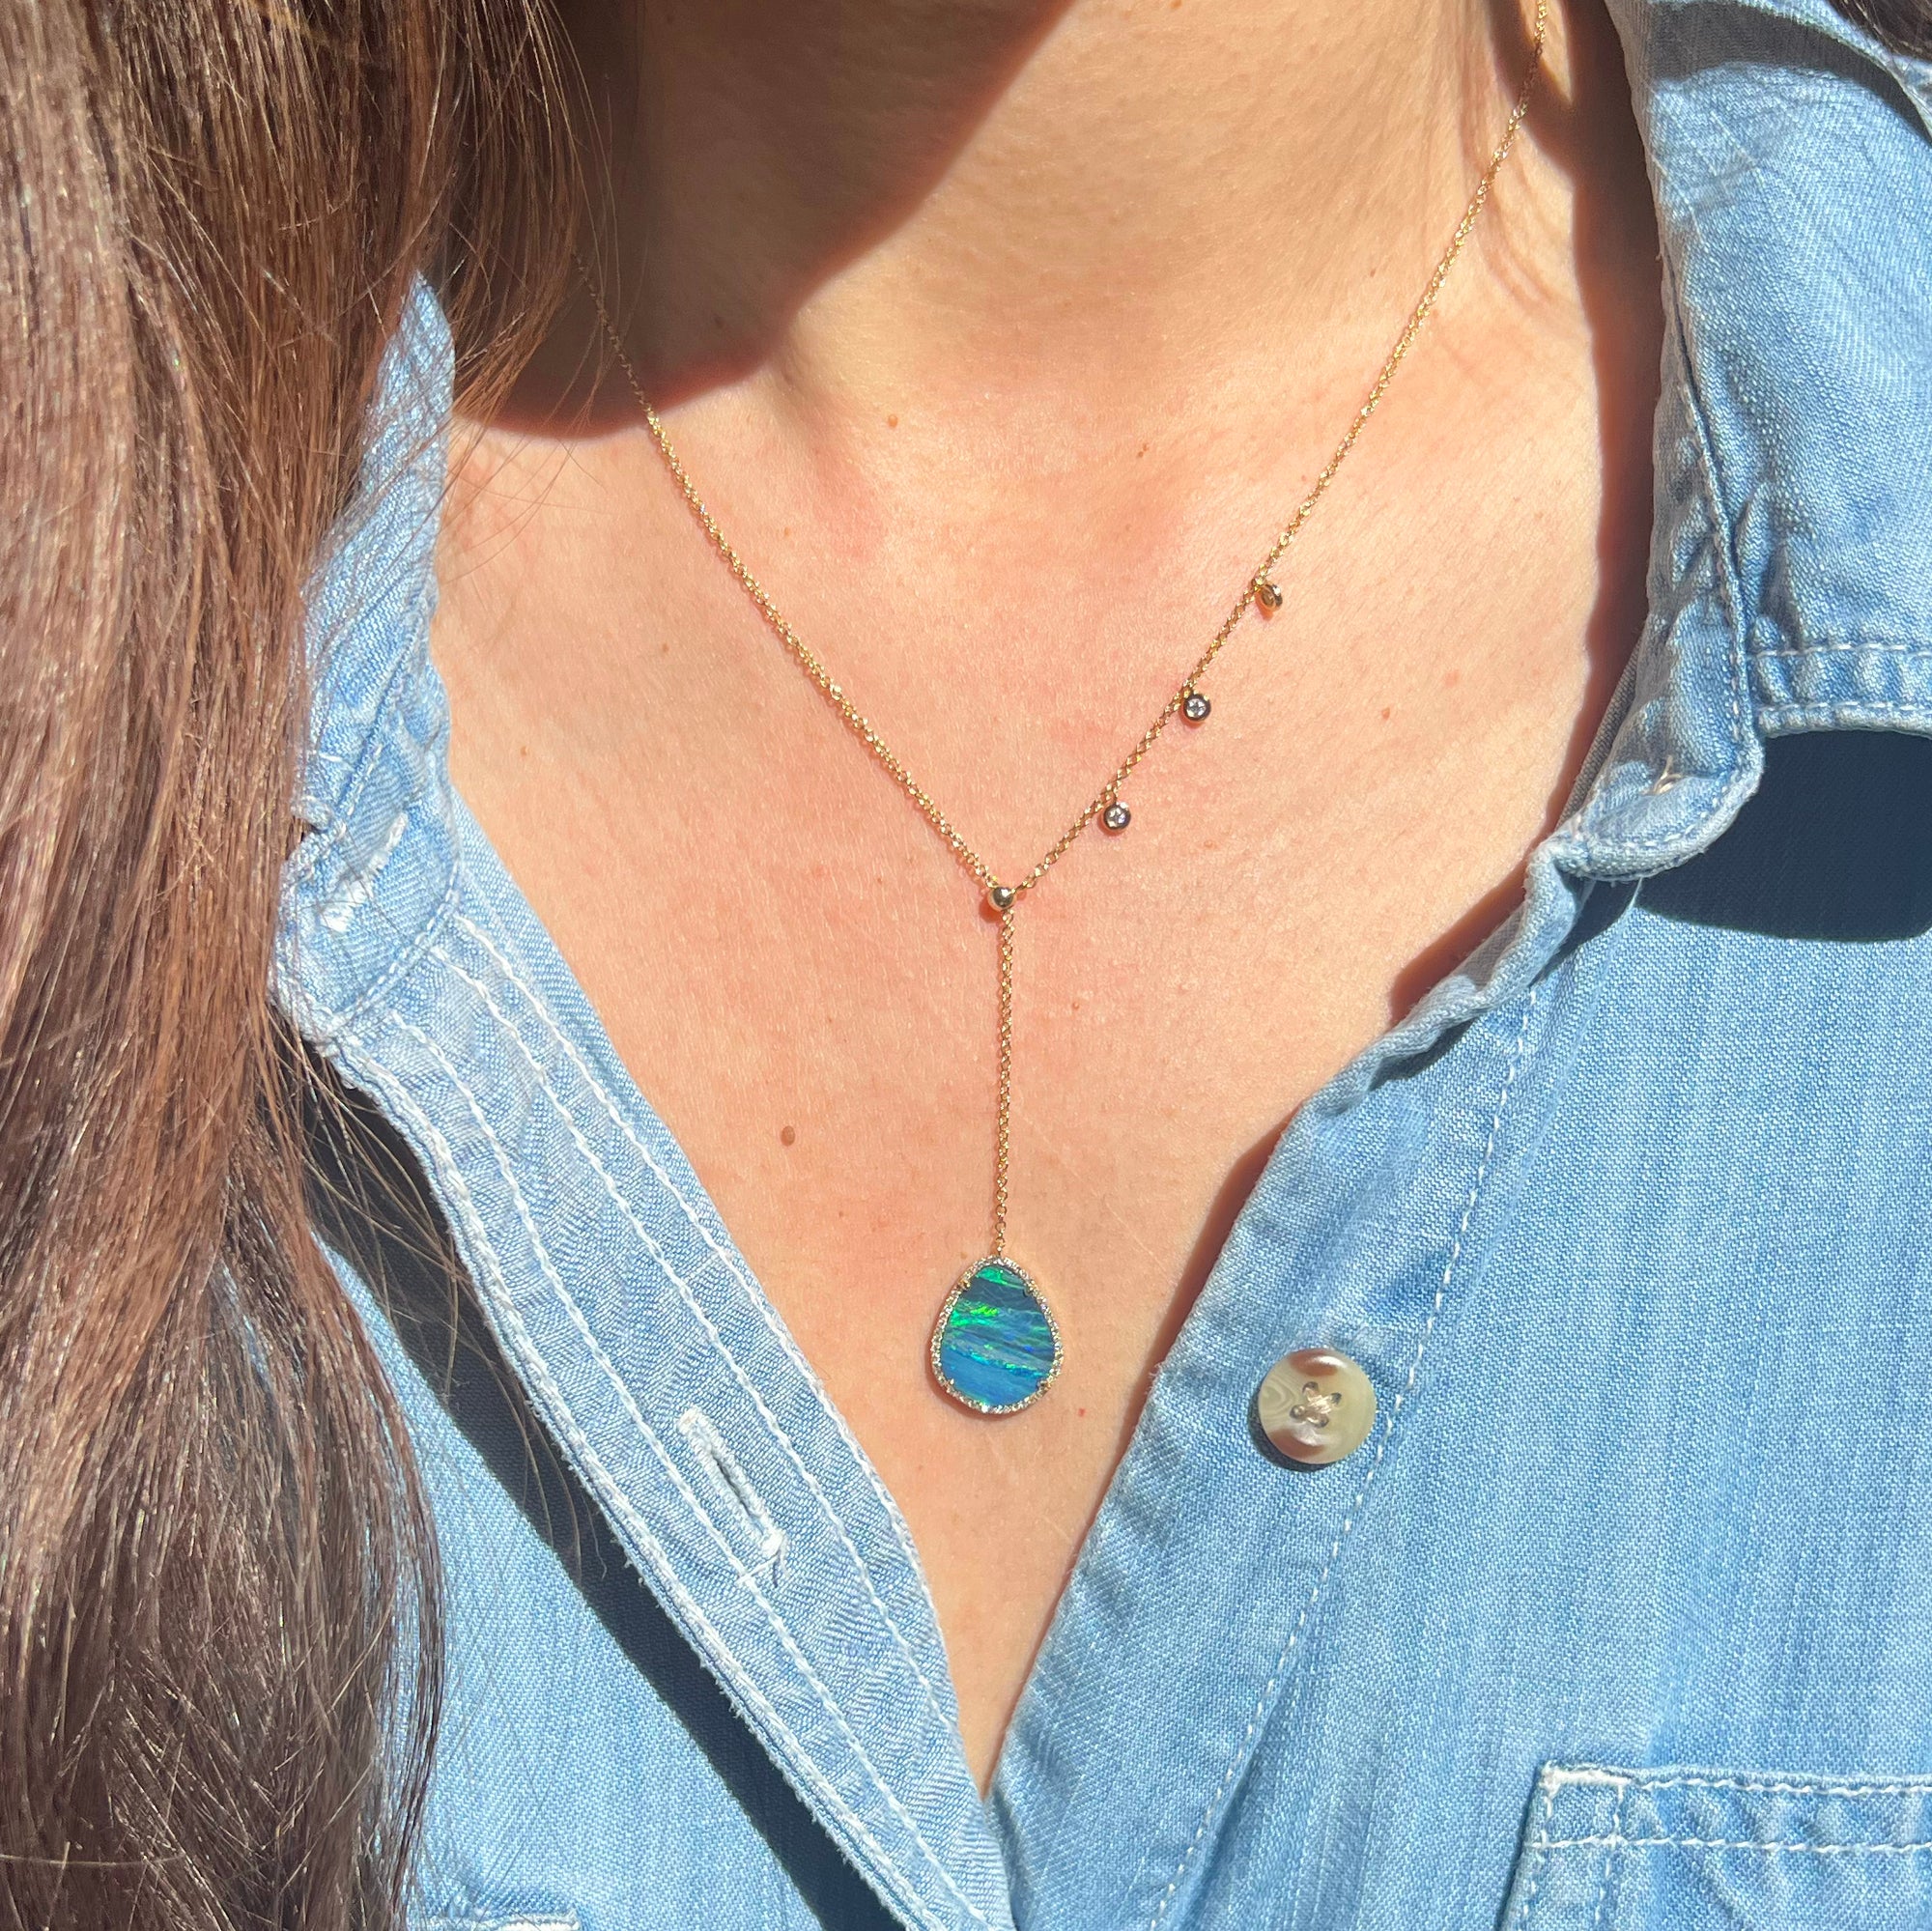 Boulder Opal Double Slider Lariat With Diamonds - Green